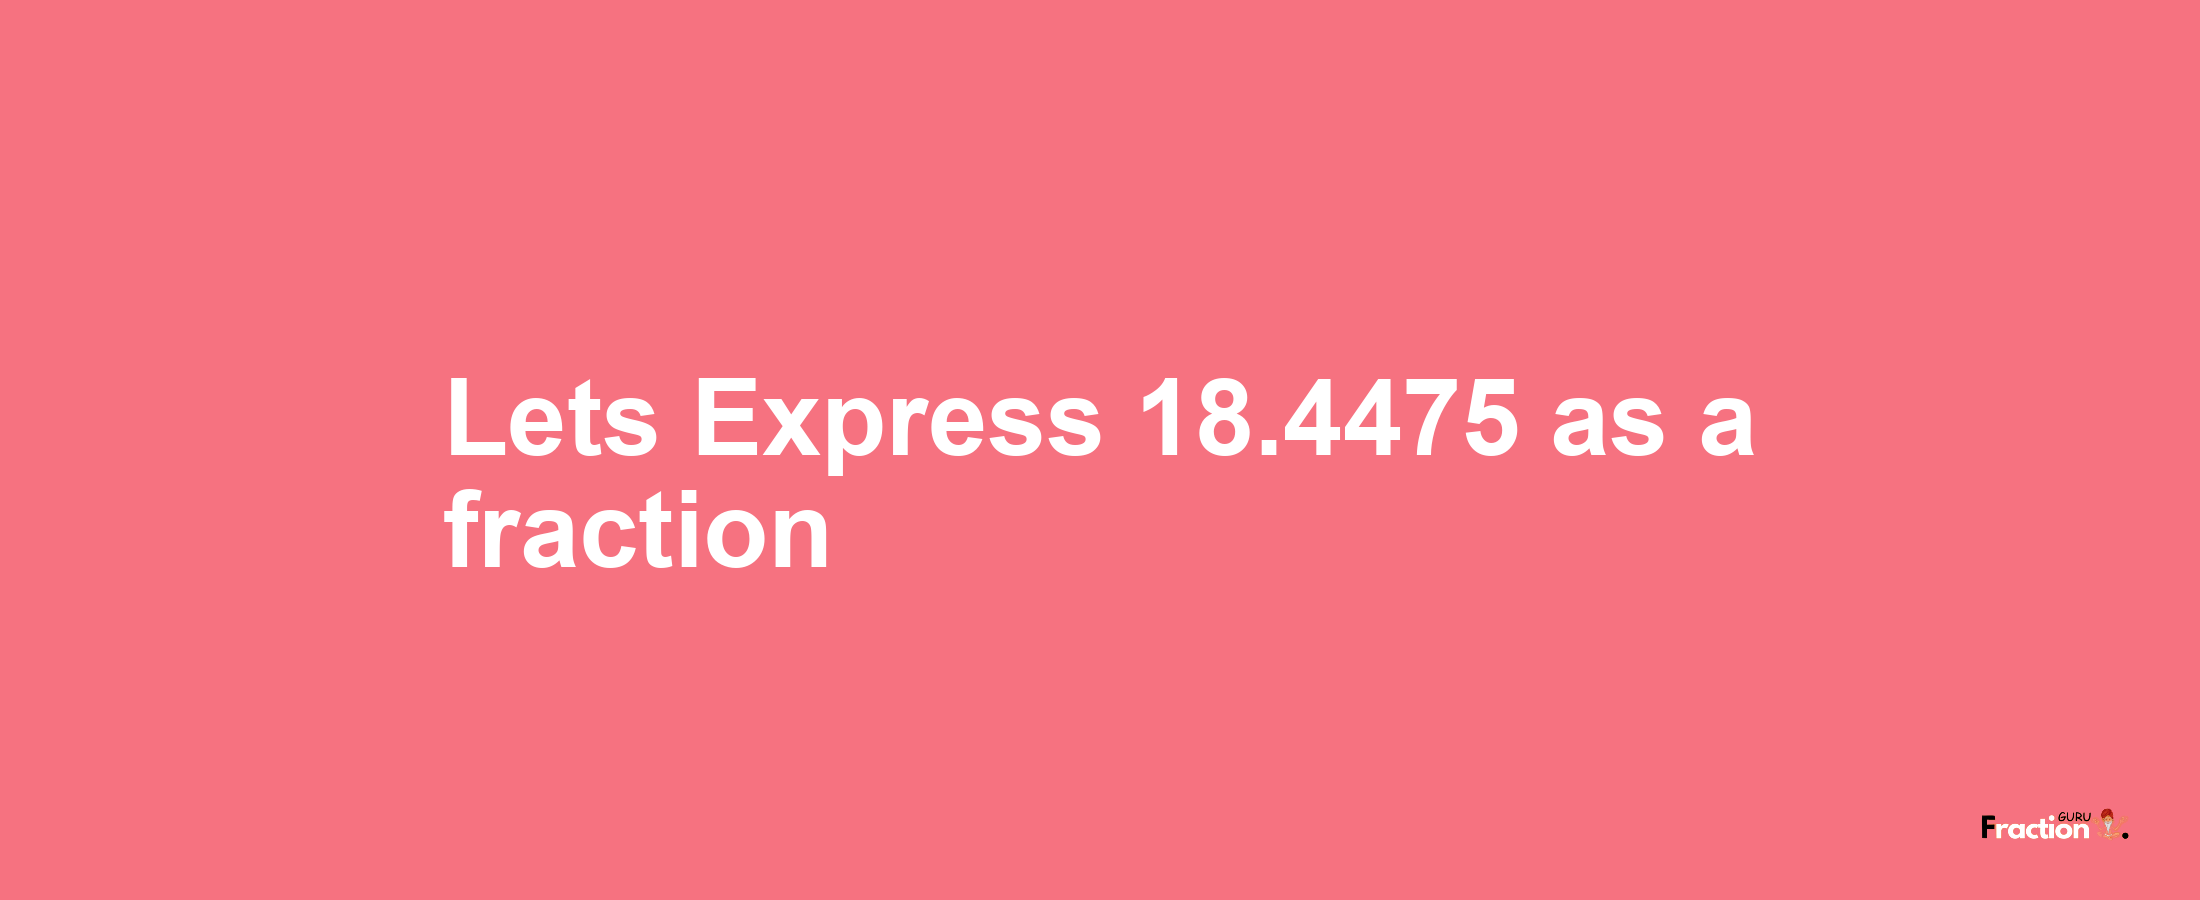 Lets Express 18.4475 as afraction